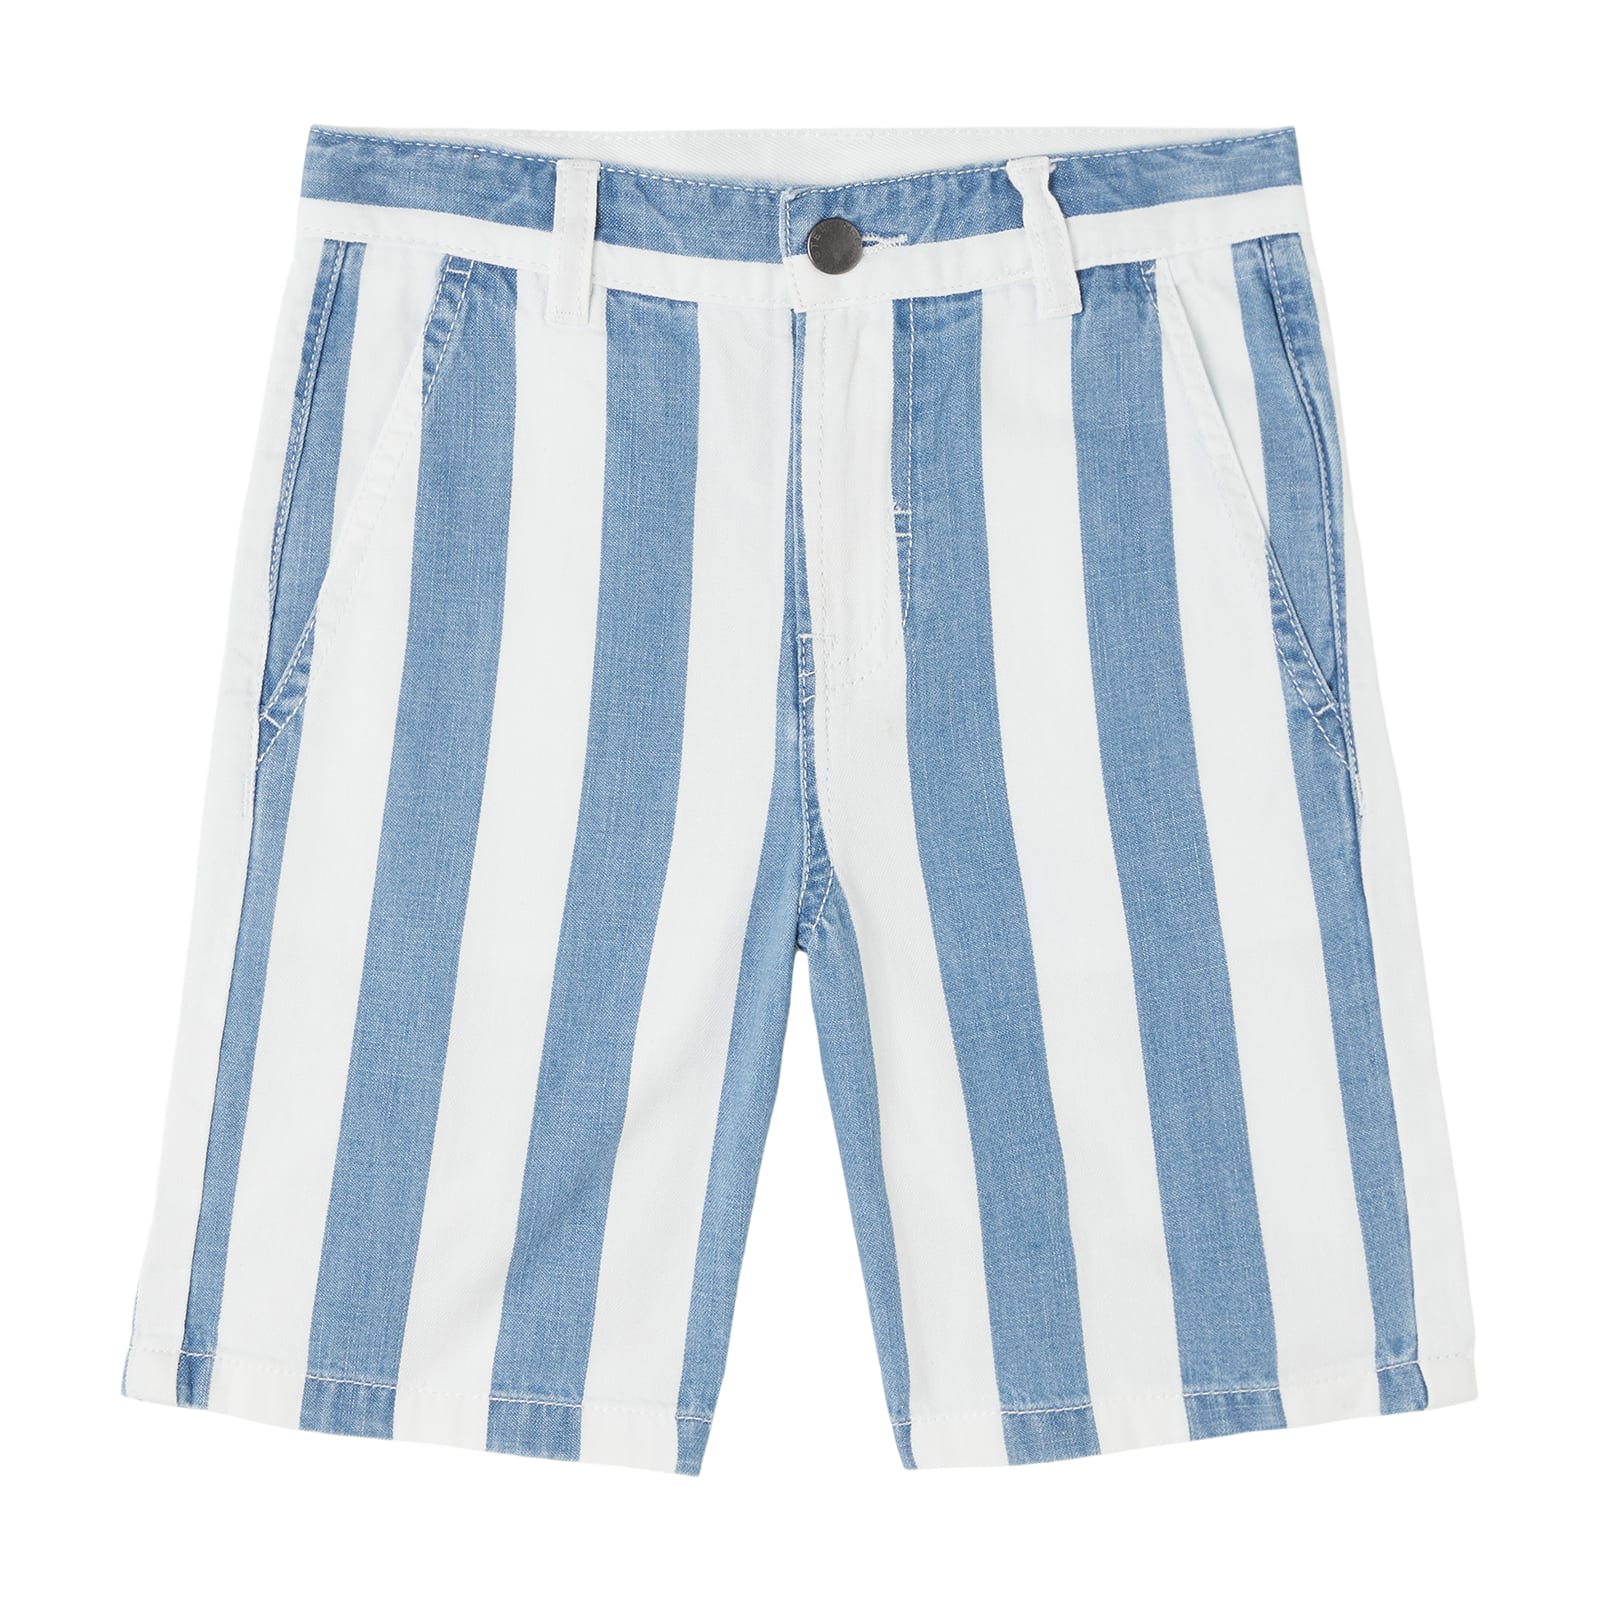 STELLA MCCARTNEY STRIPED SHORTS WITH EMBROIDERY